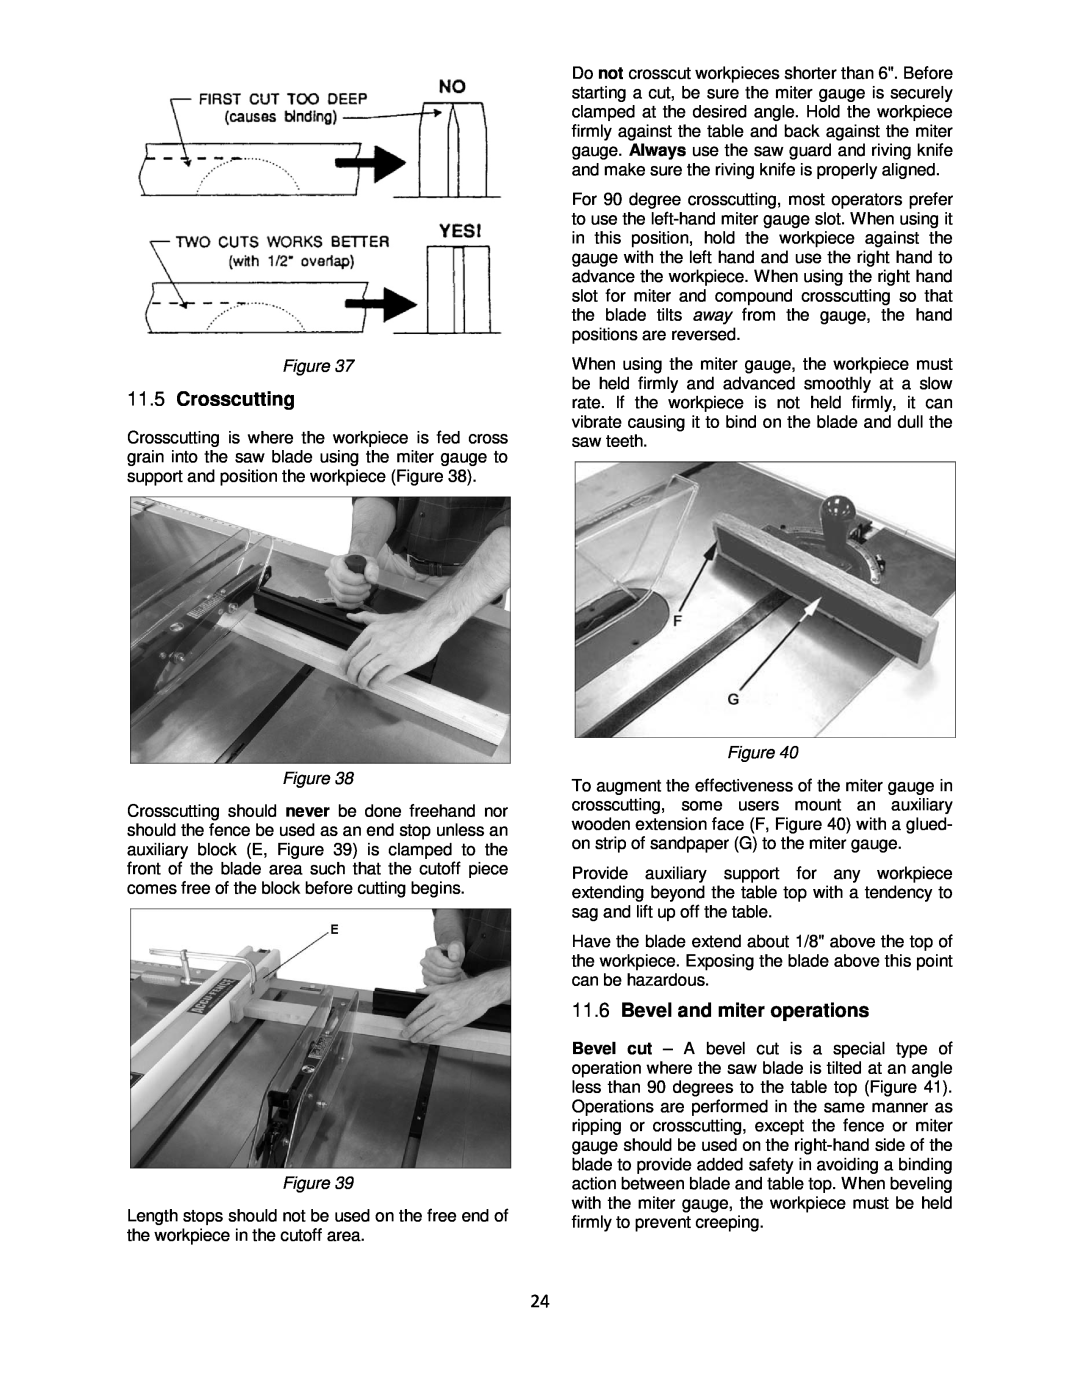 Powermatic 64B operating instructions Crosscutting, Bevel and miter operations 